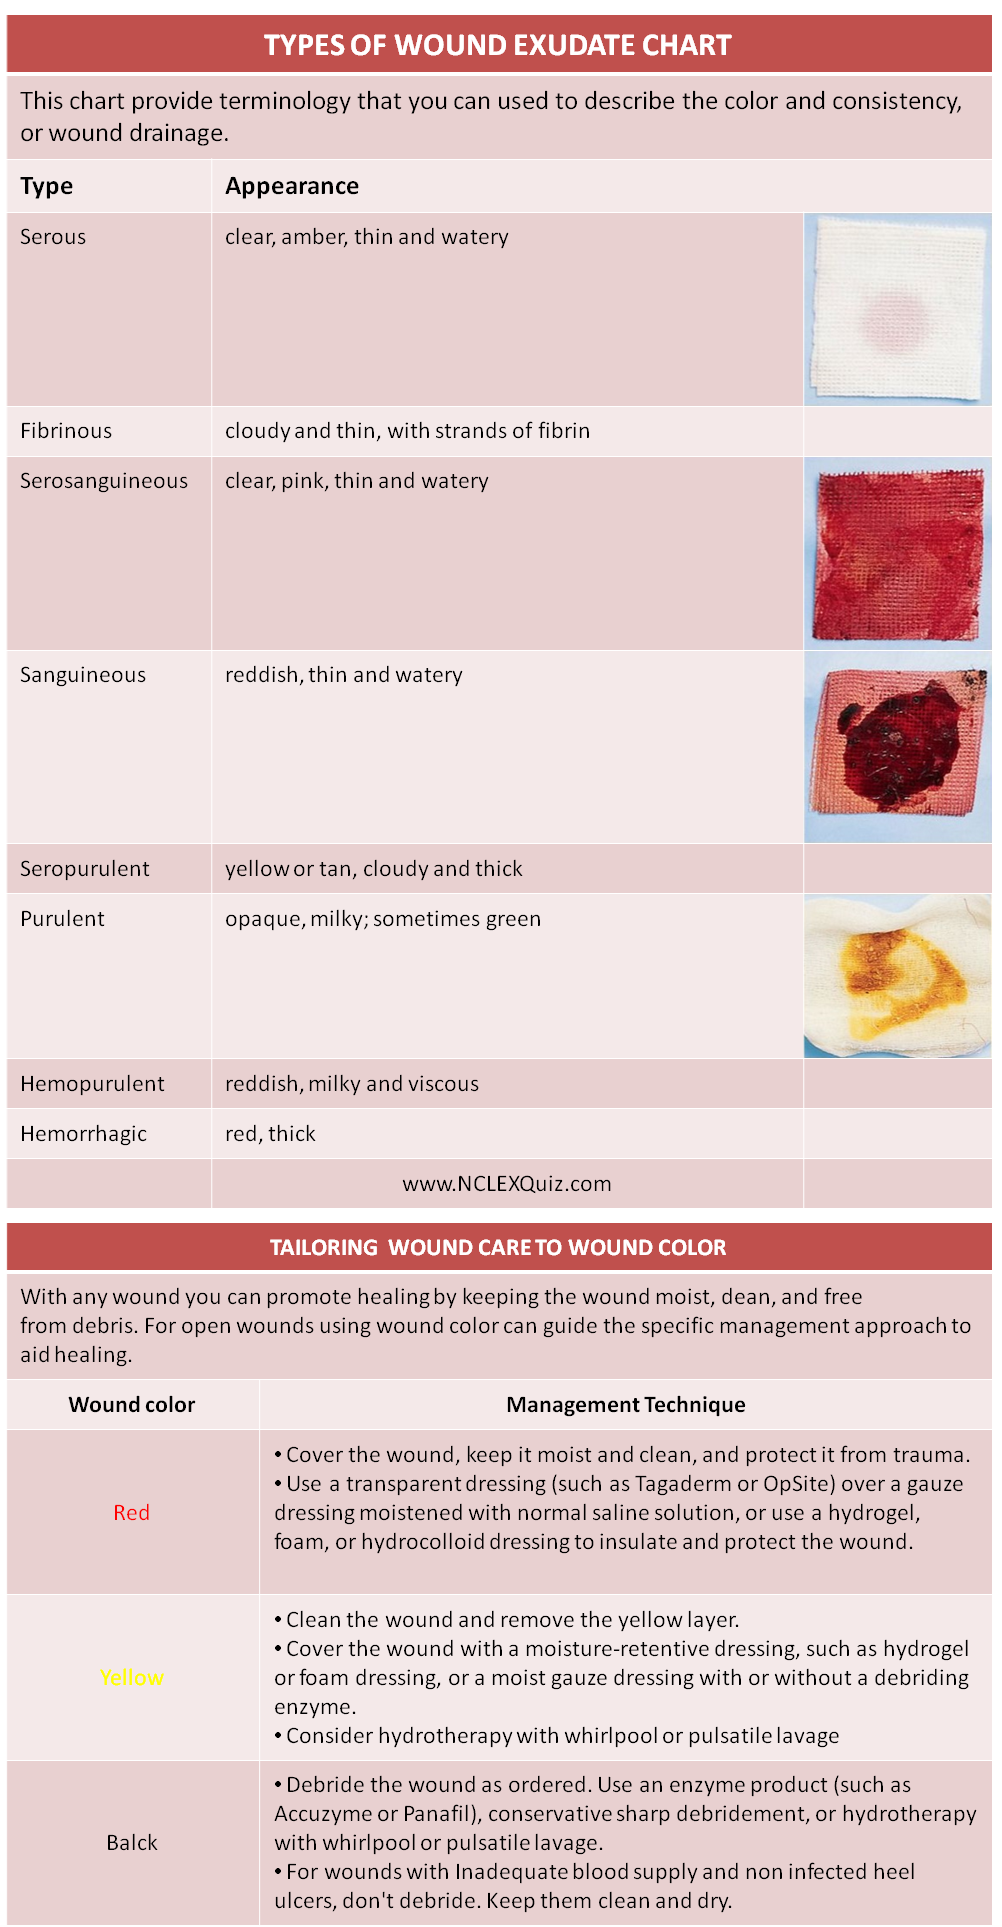 Types of Wound Exudate Cheat Sheet